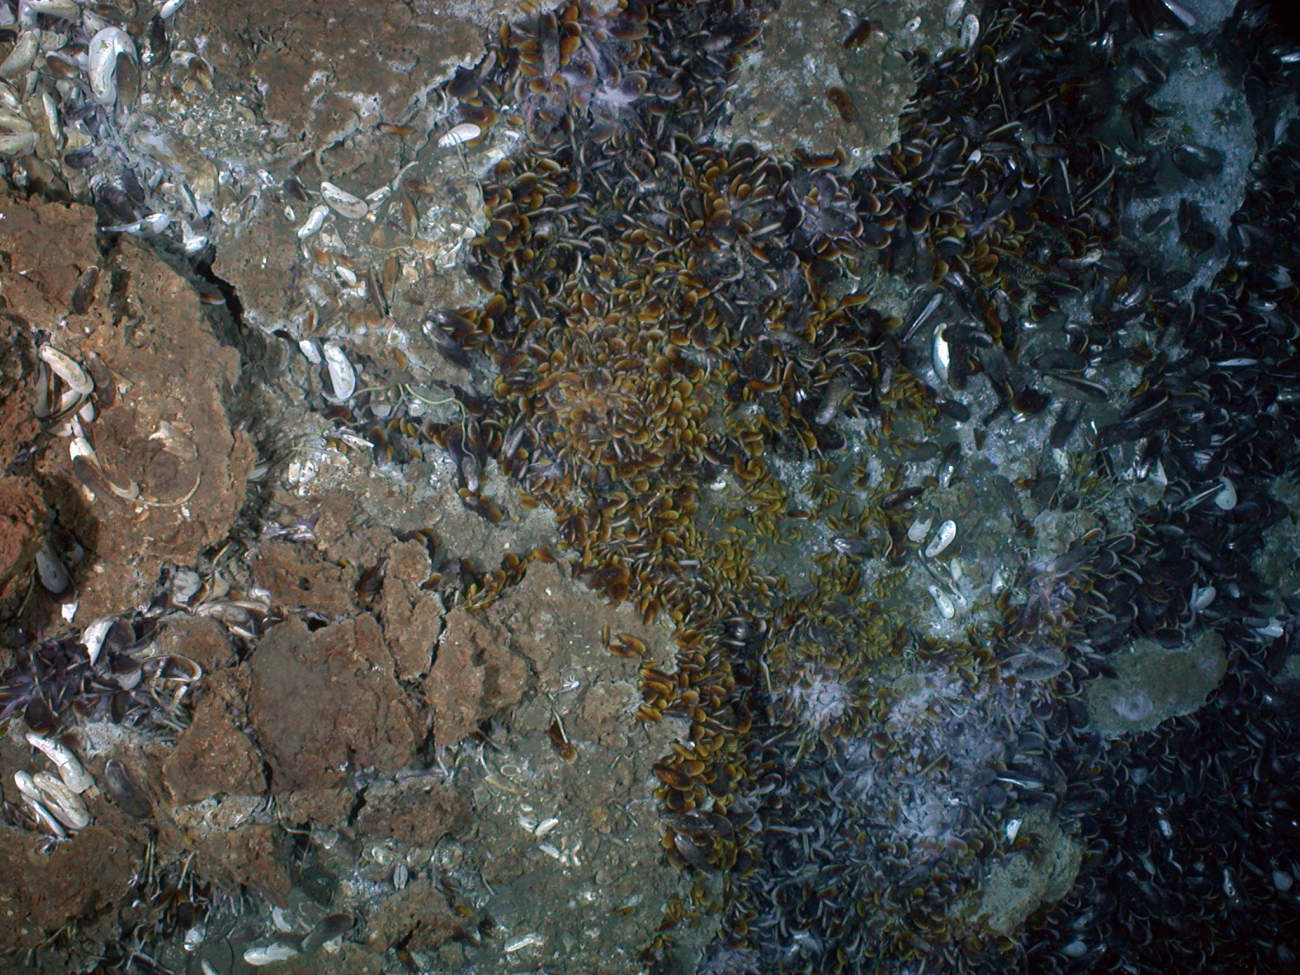 Bacterial mats, mussels, and tubeworms are common at cold seeps